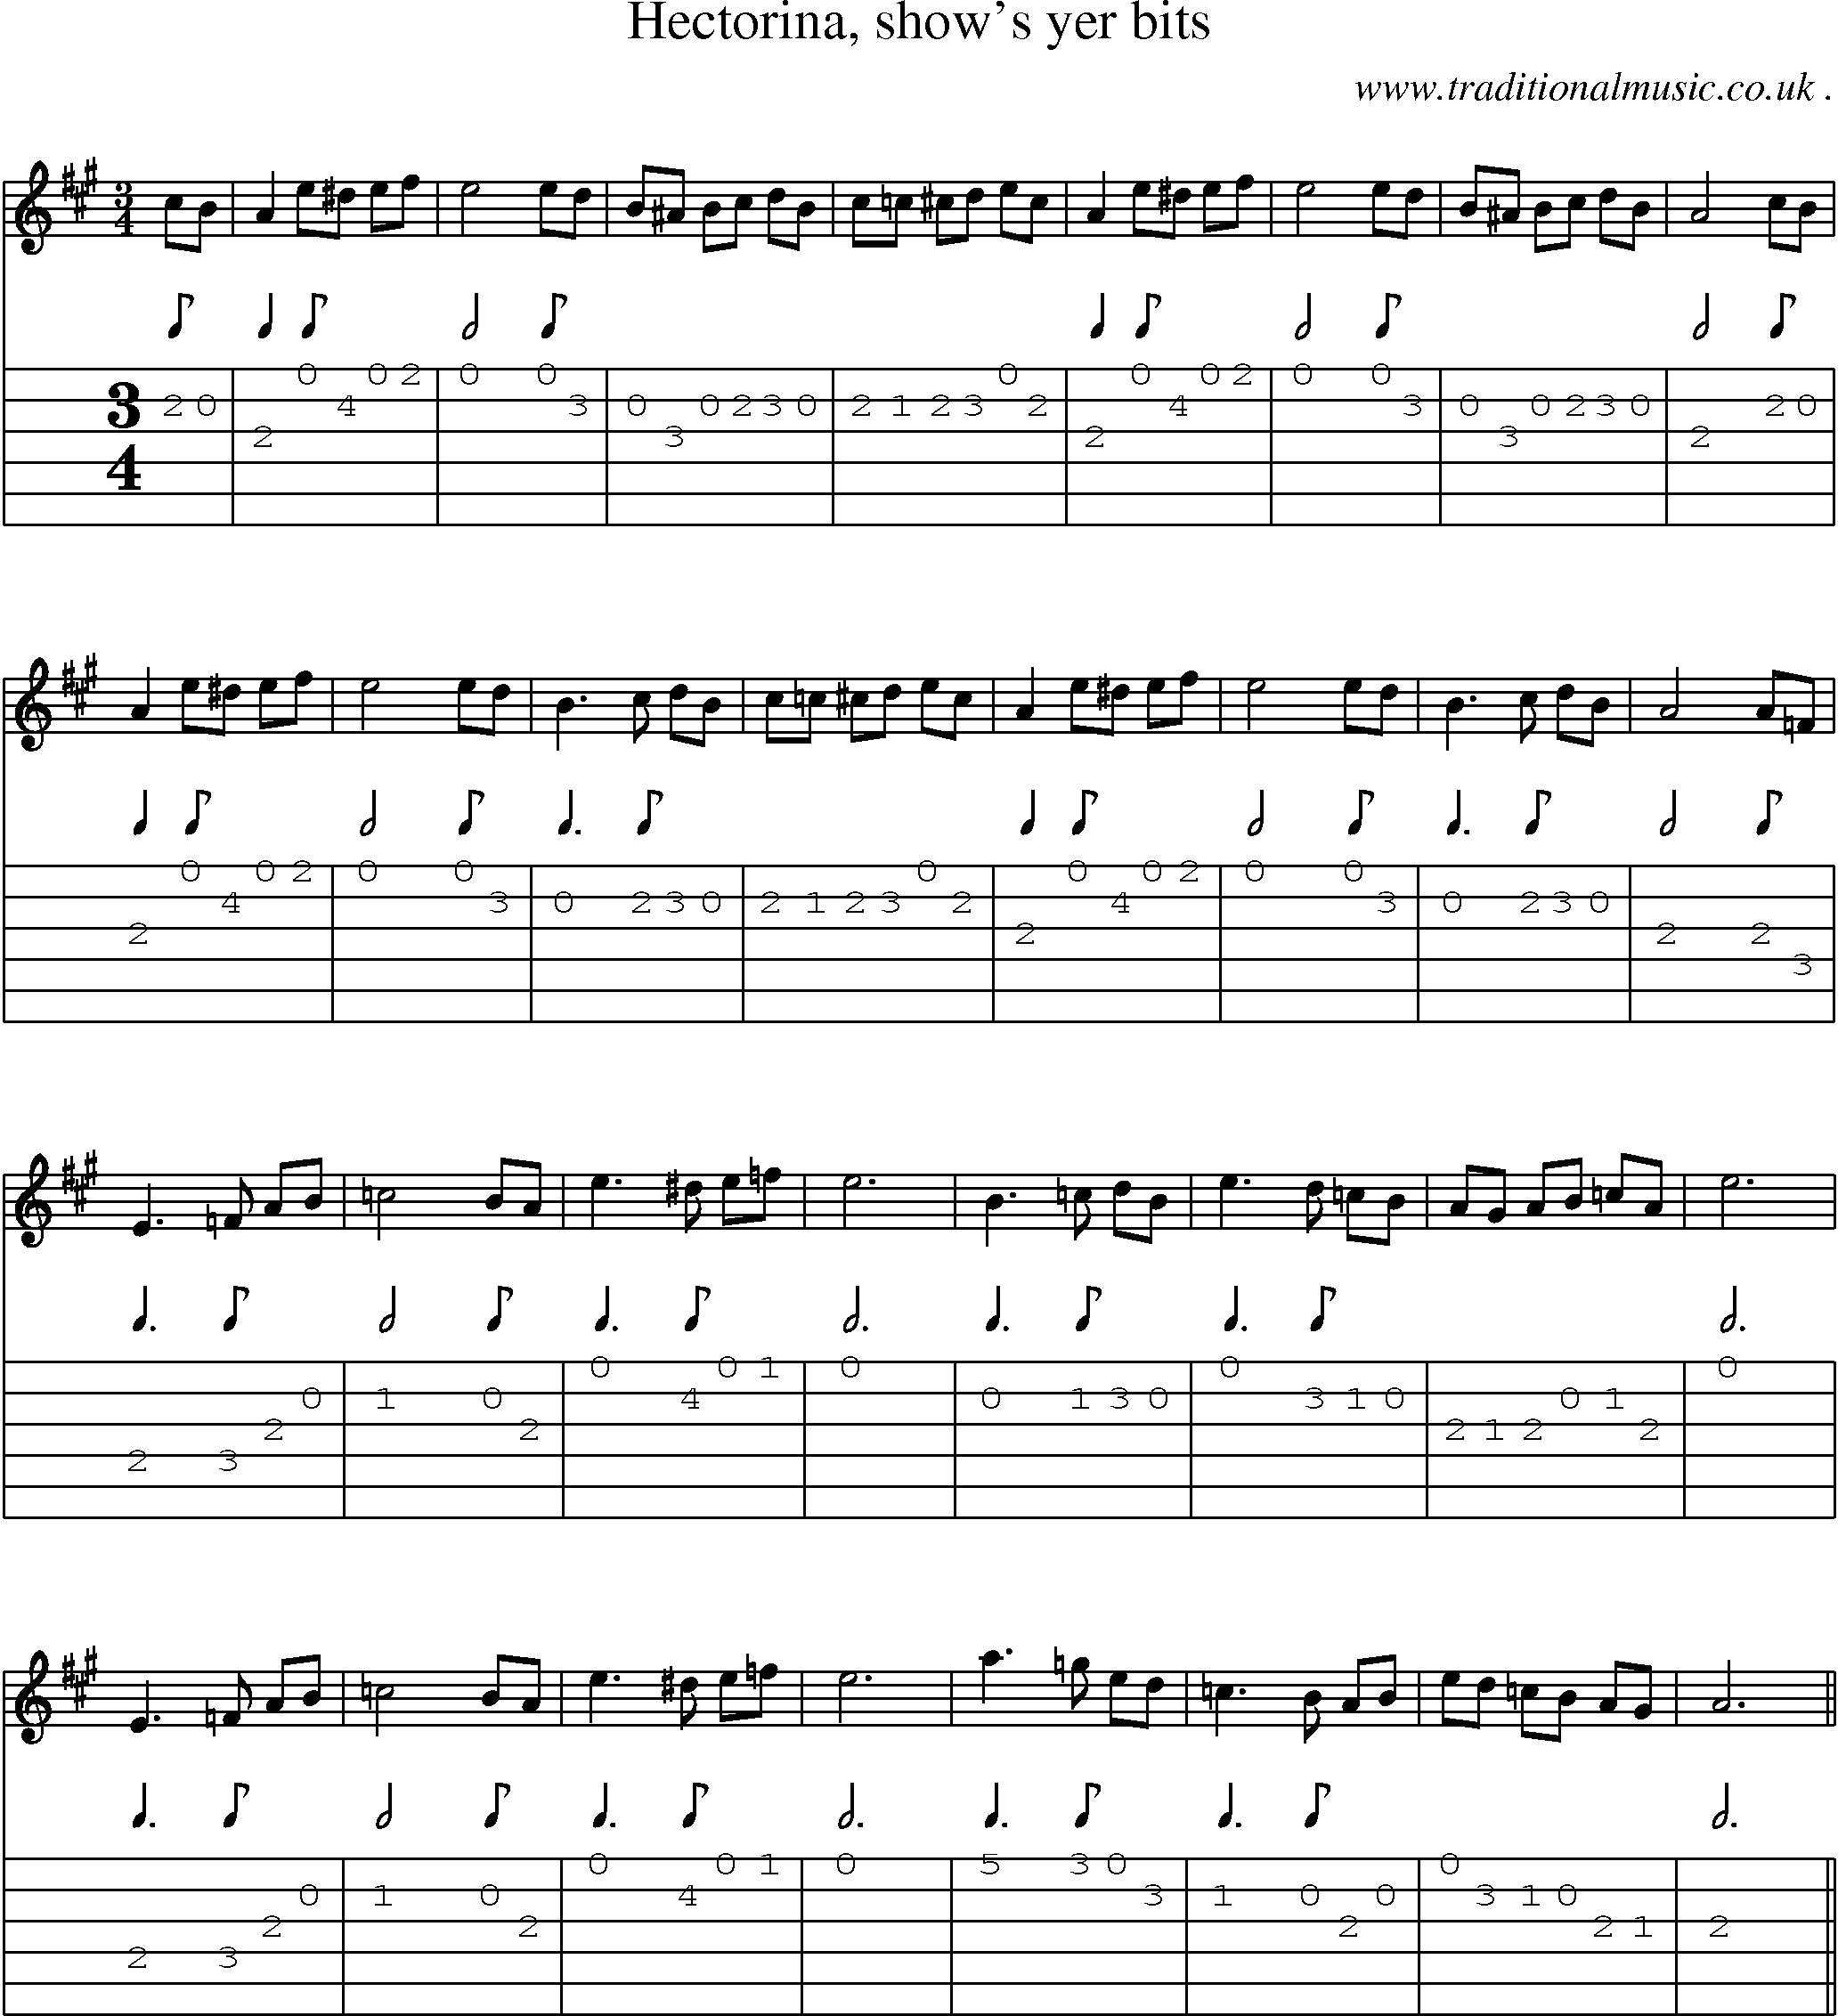 Sheet-Music and Guitar Tabs for Hectorina Shows Yer Bits